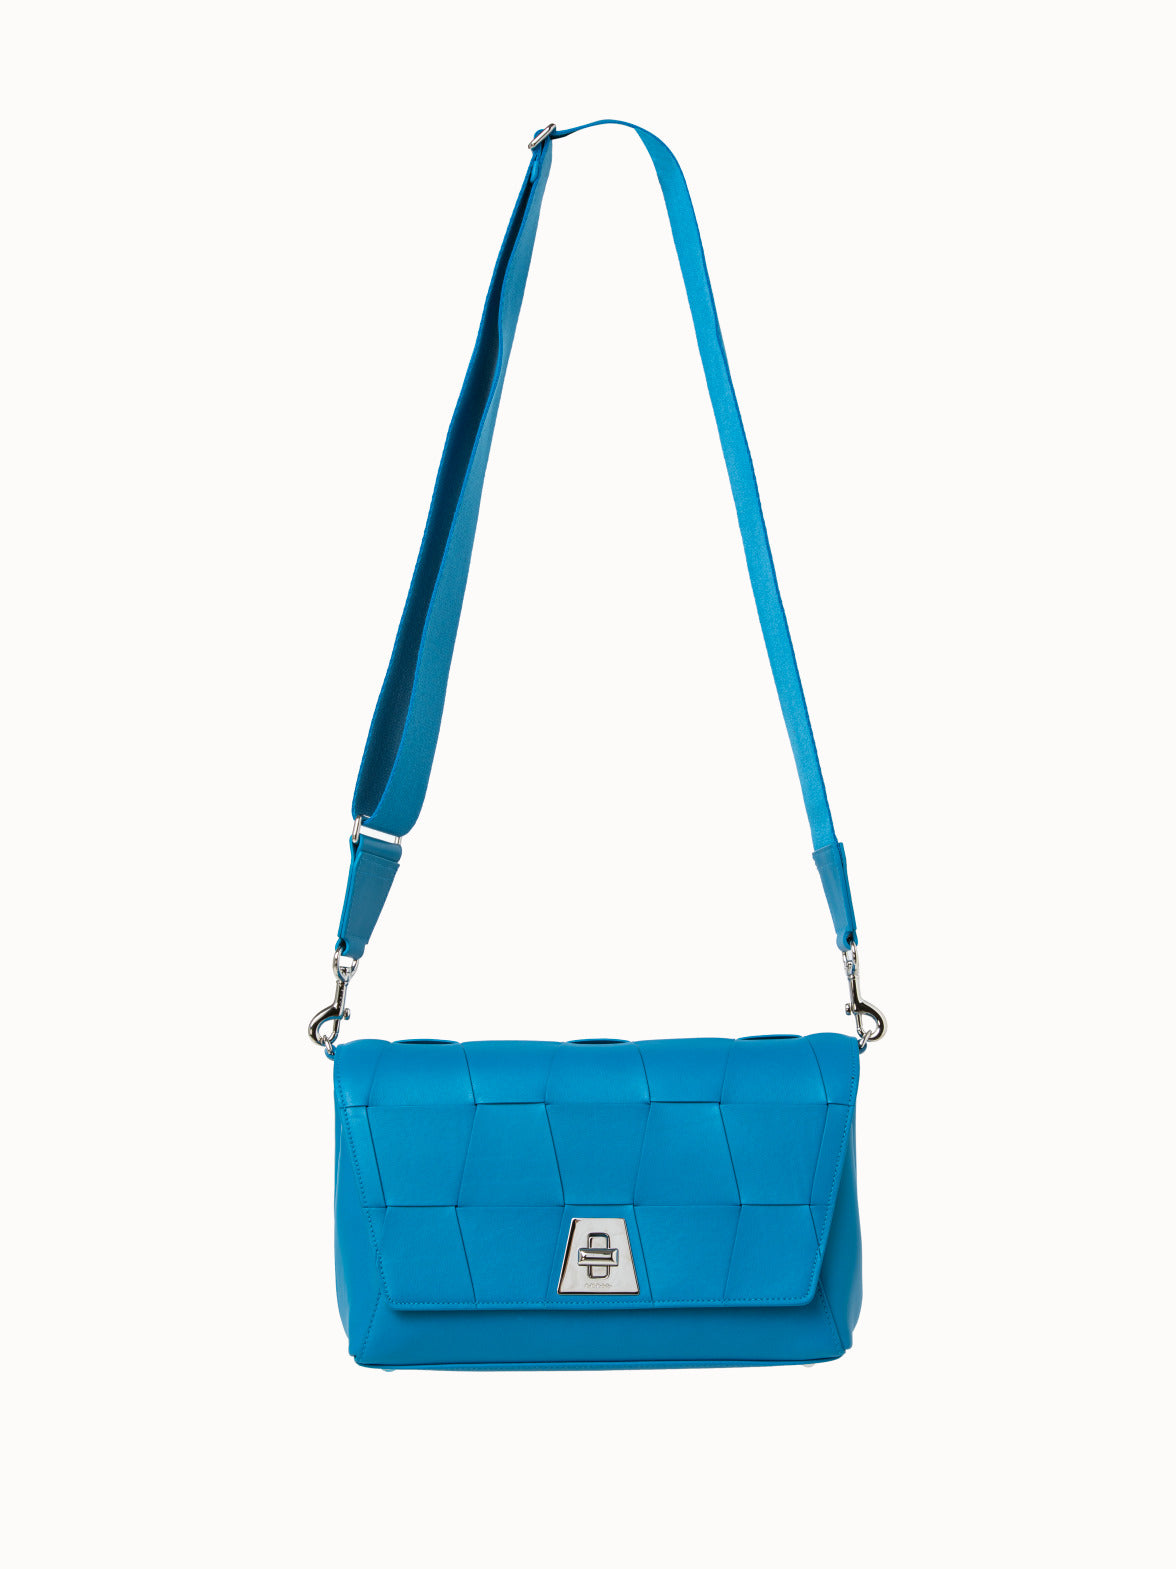 Anouk Day Bag in Python Leather with Adjustable Shoulder Strap